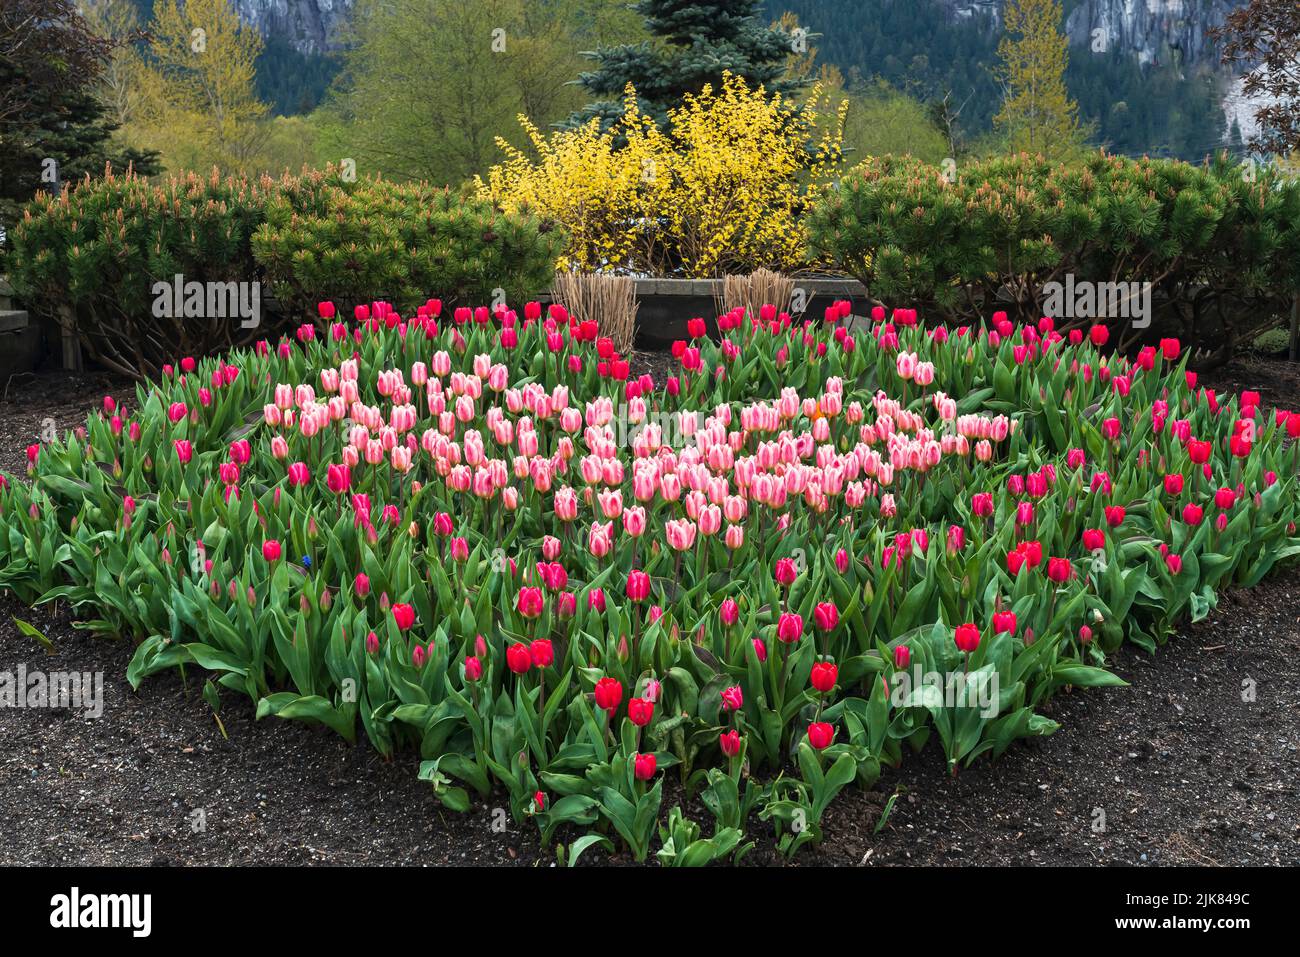 A heart shaped flower bed of tulips in a small park in Squamish, British Columbia, Canada. Stock Photo